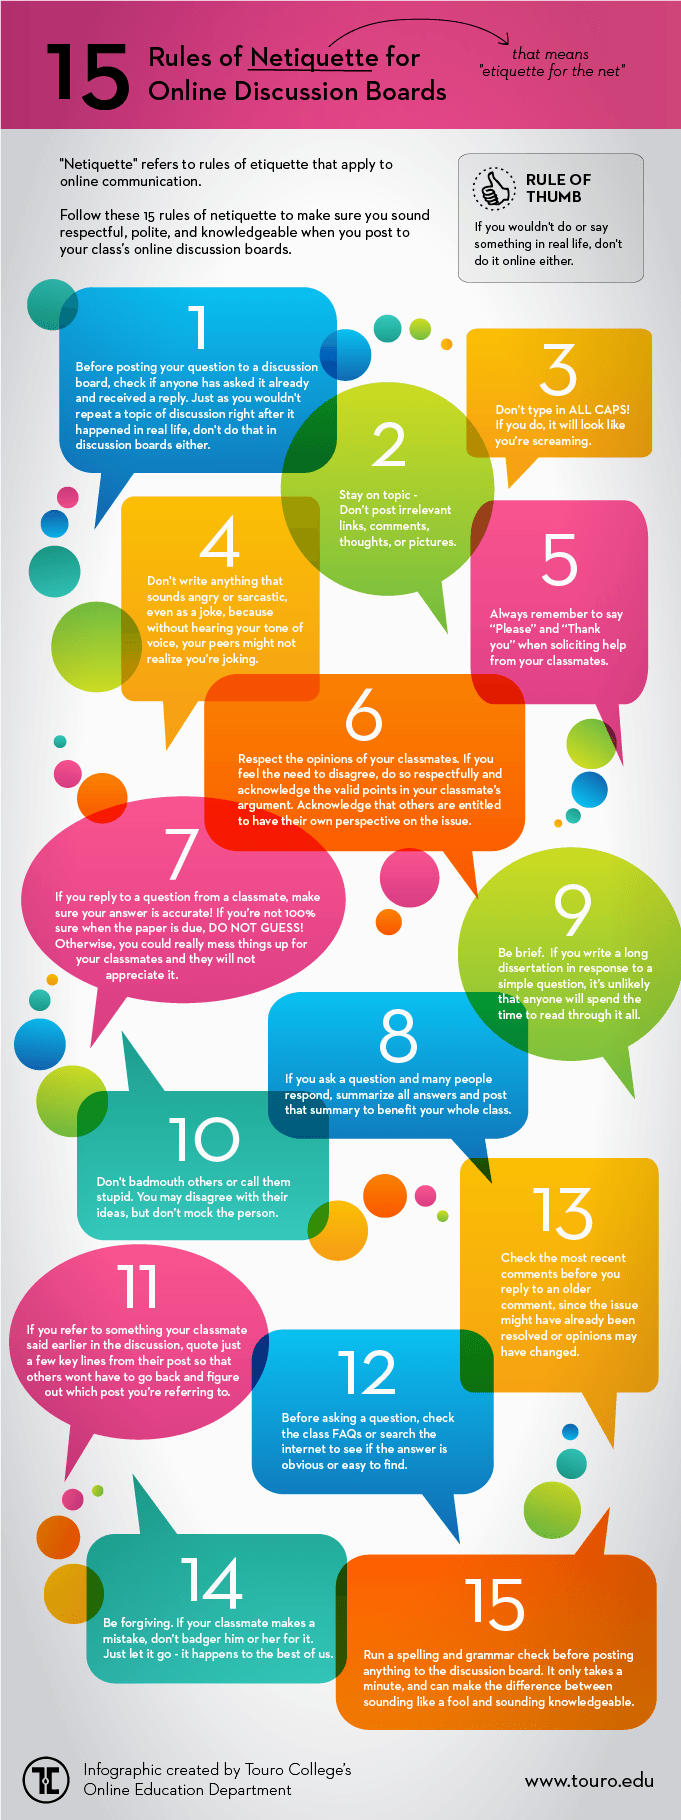 Netiquette-Online-Discussion-Boards-infographic